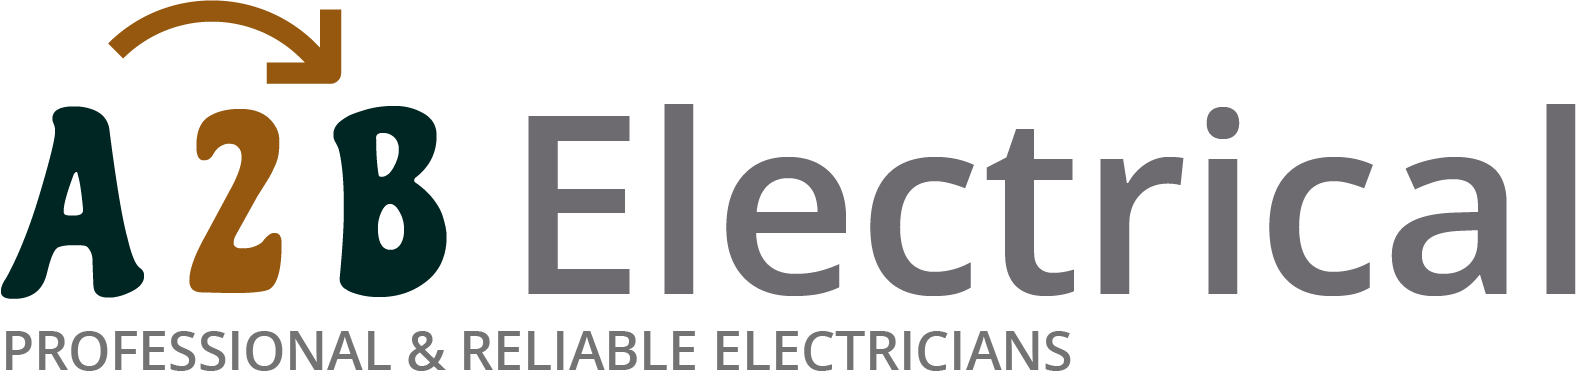 If you have electrical wiring problems in Forest Gate, we can provide an electrician to have a look for you. 